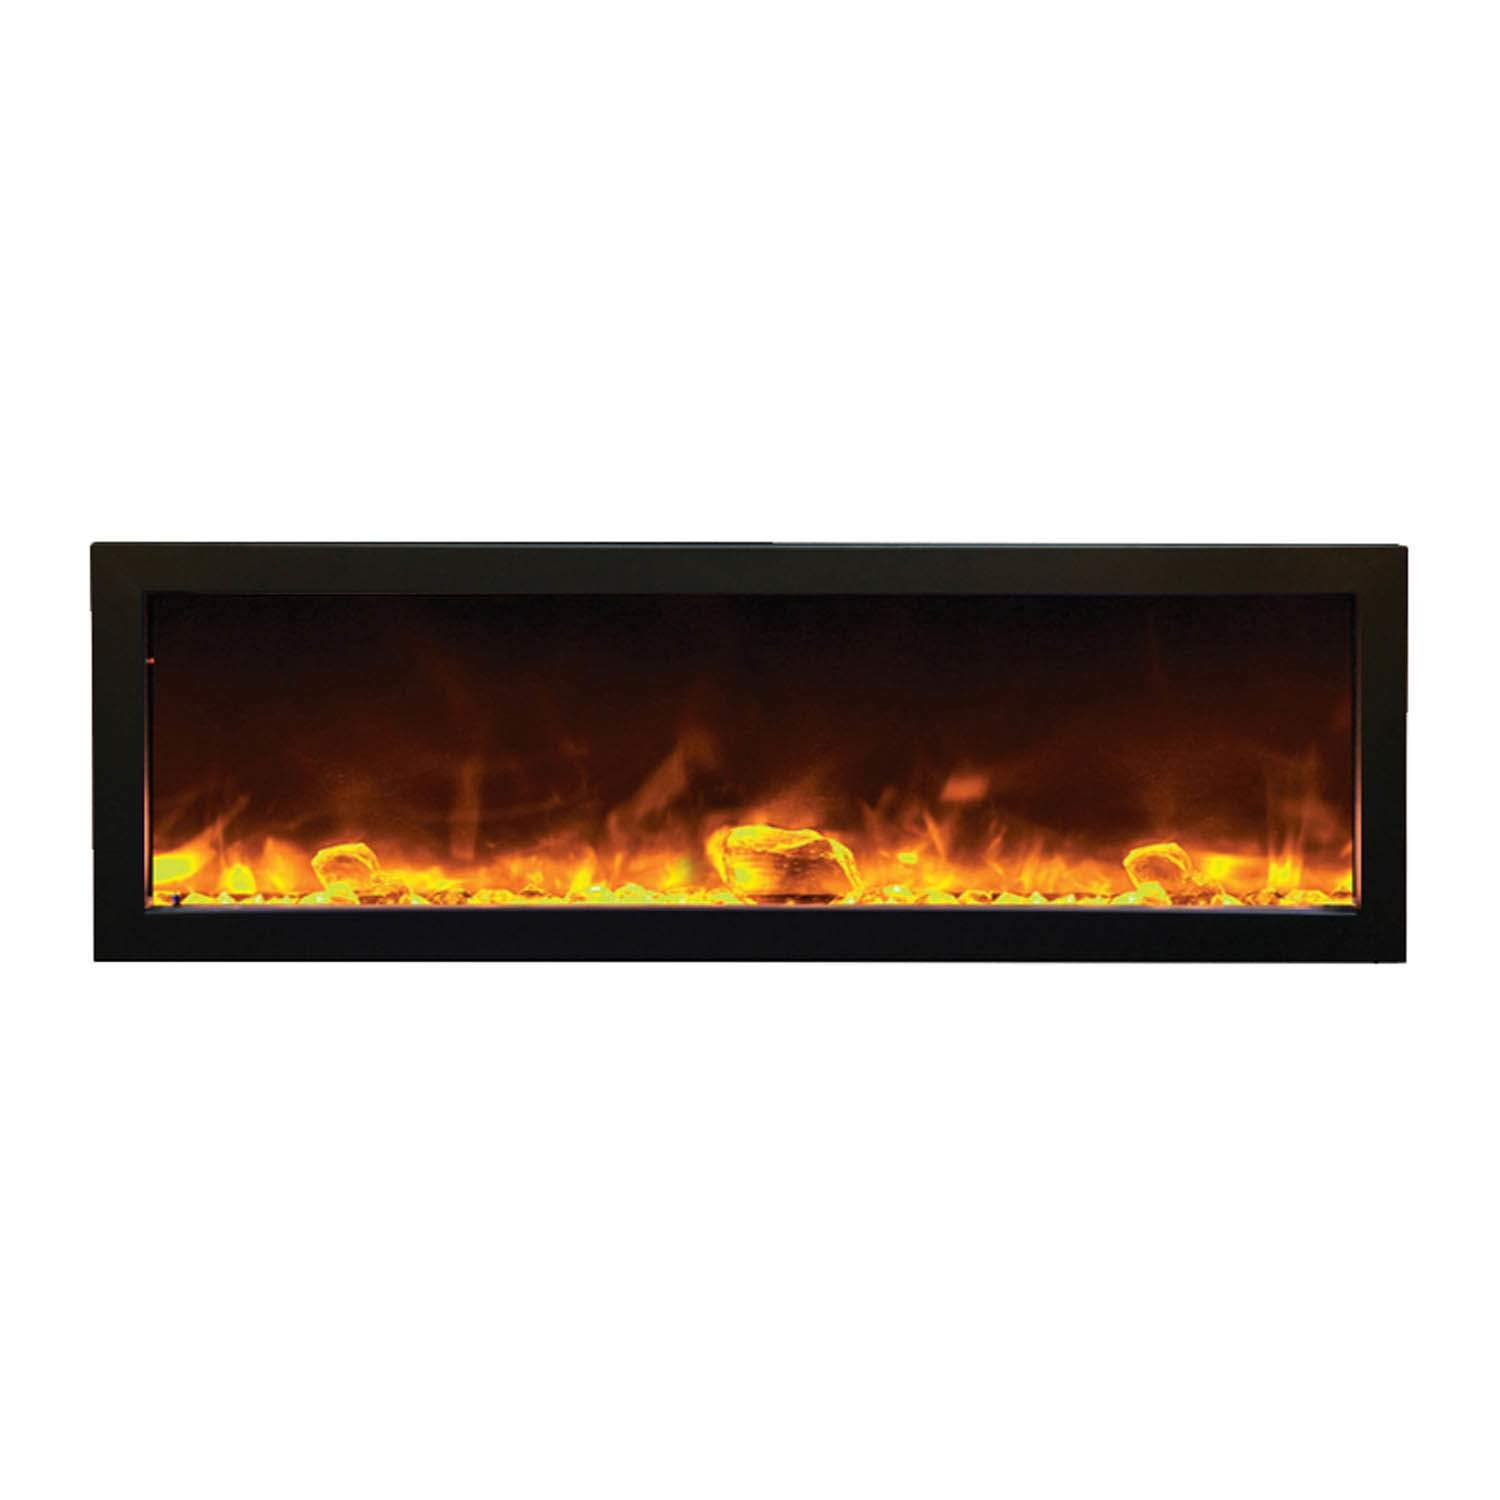 Tv Stand with Fireplace 65 Inch New 19 Awesome 50 Inch Recessed Electric Fireplace